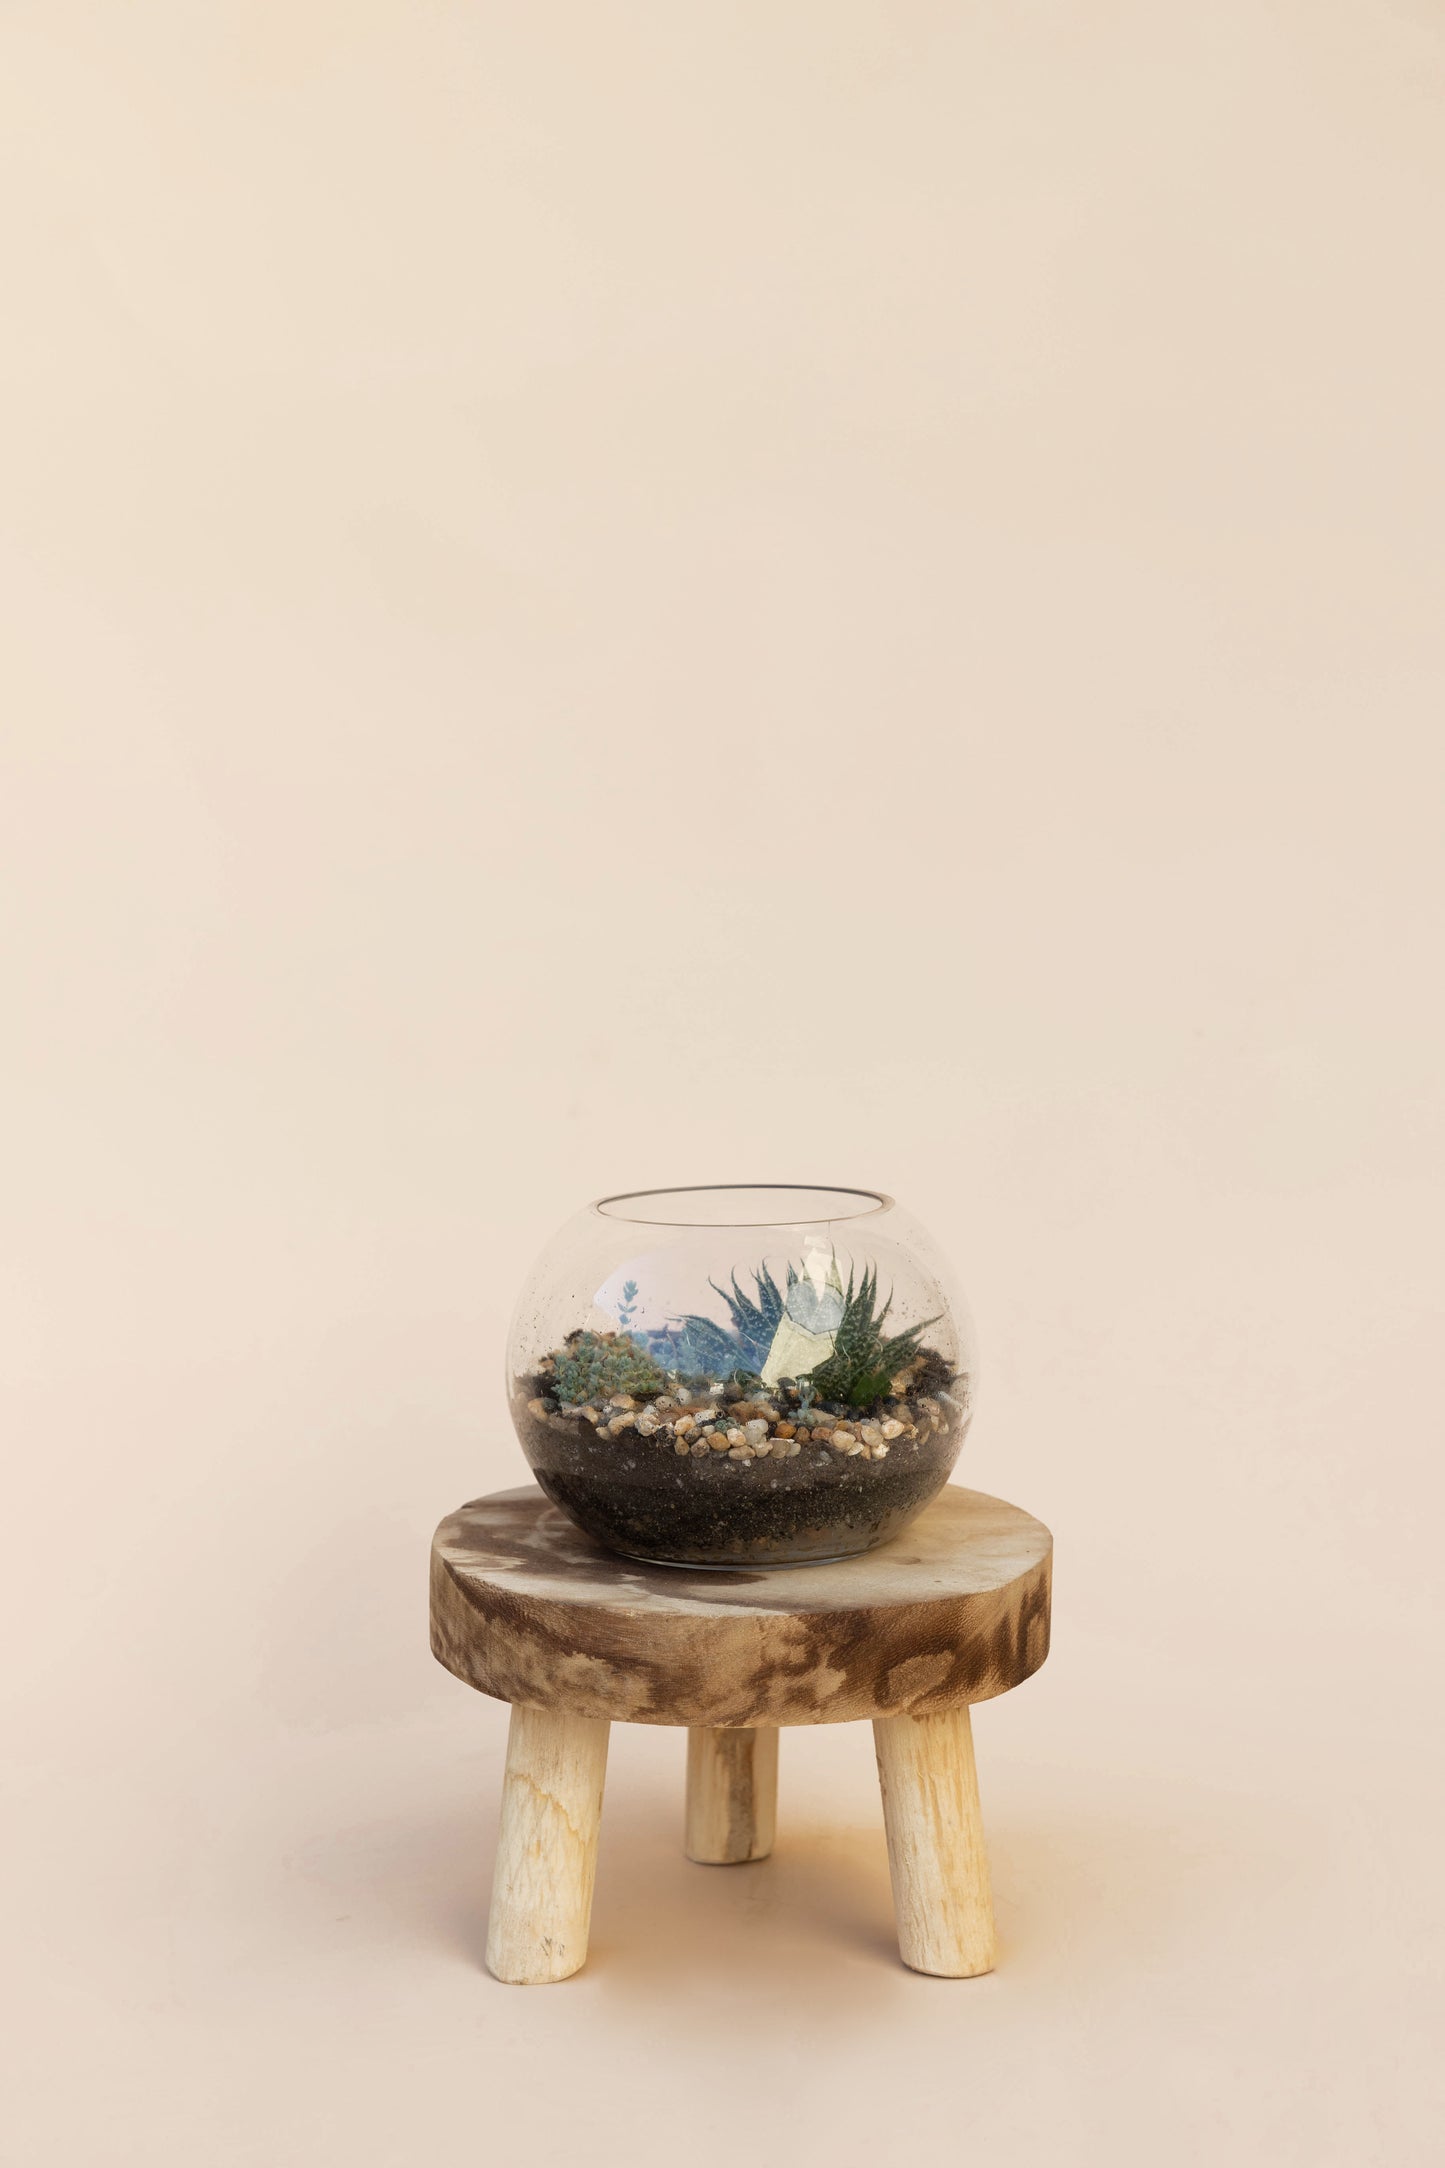 I'm a succa for you - Succulent fishbowl